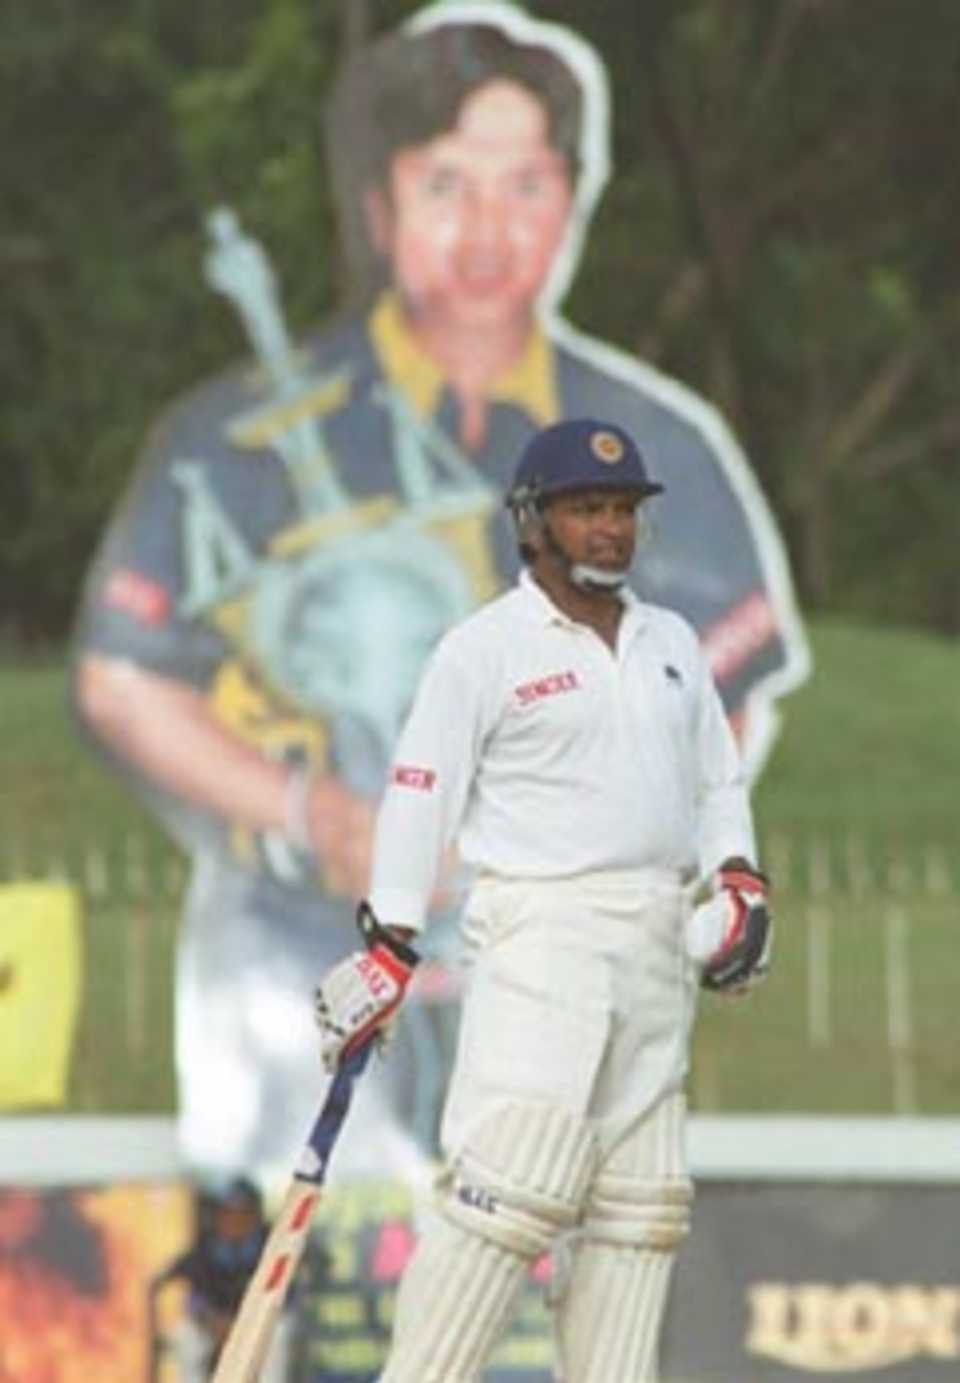 While playing his last Test innings Ranatunga inadvertently poses in front of a huge hoarding of himself. South Africa in Sri Lanka 2000/01, 3rd Test, Sri Lanka v South Africa, Sinhalese Sports Club Ground, Colombo,06-10 August 2000 (Day 5).